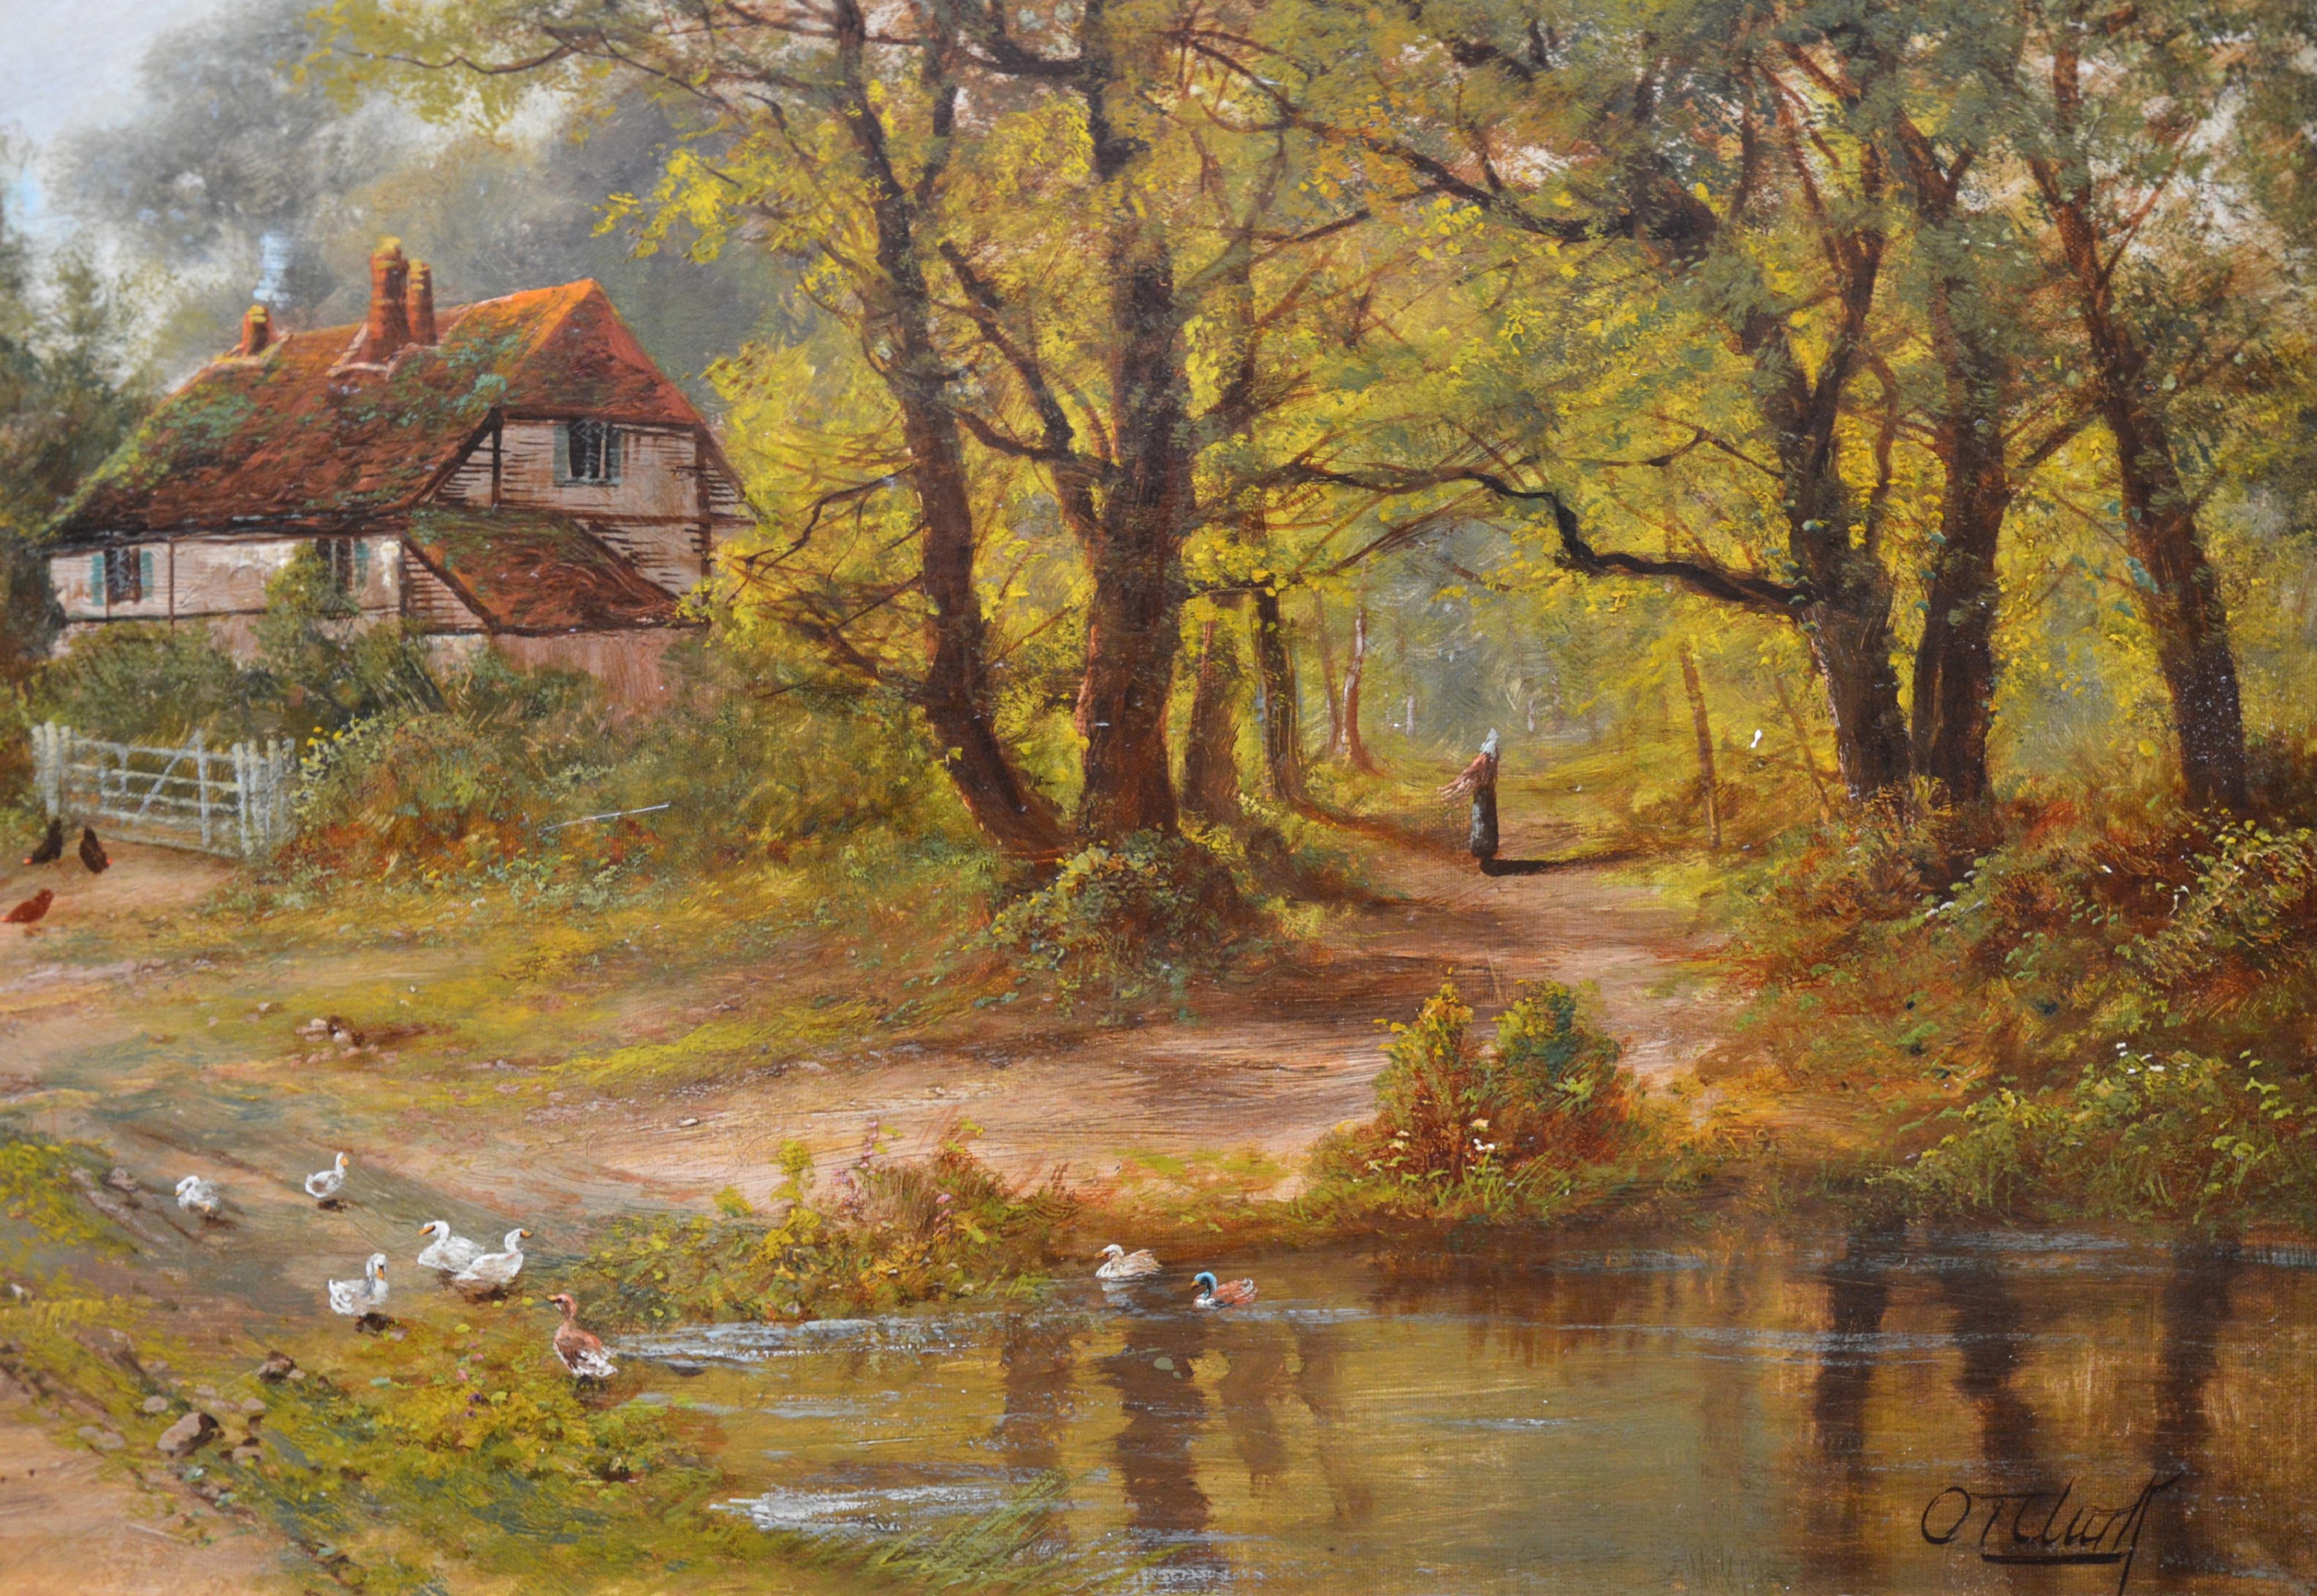 The Edge of Epping Forest - Large 19th Century English Landscape Oil Painting 2